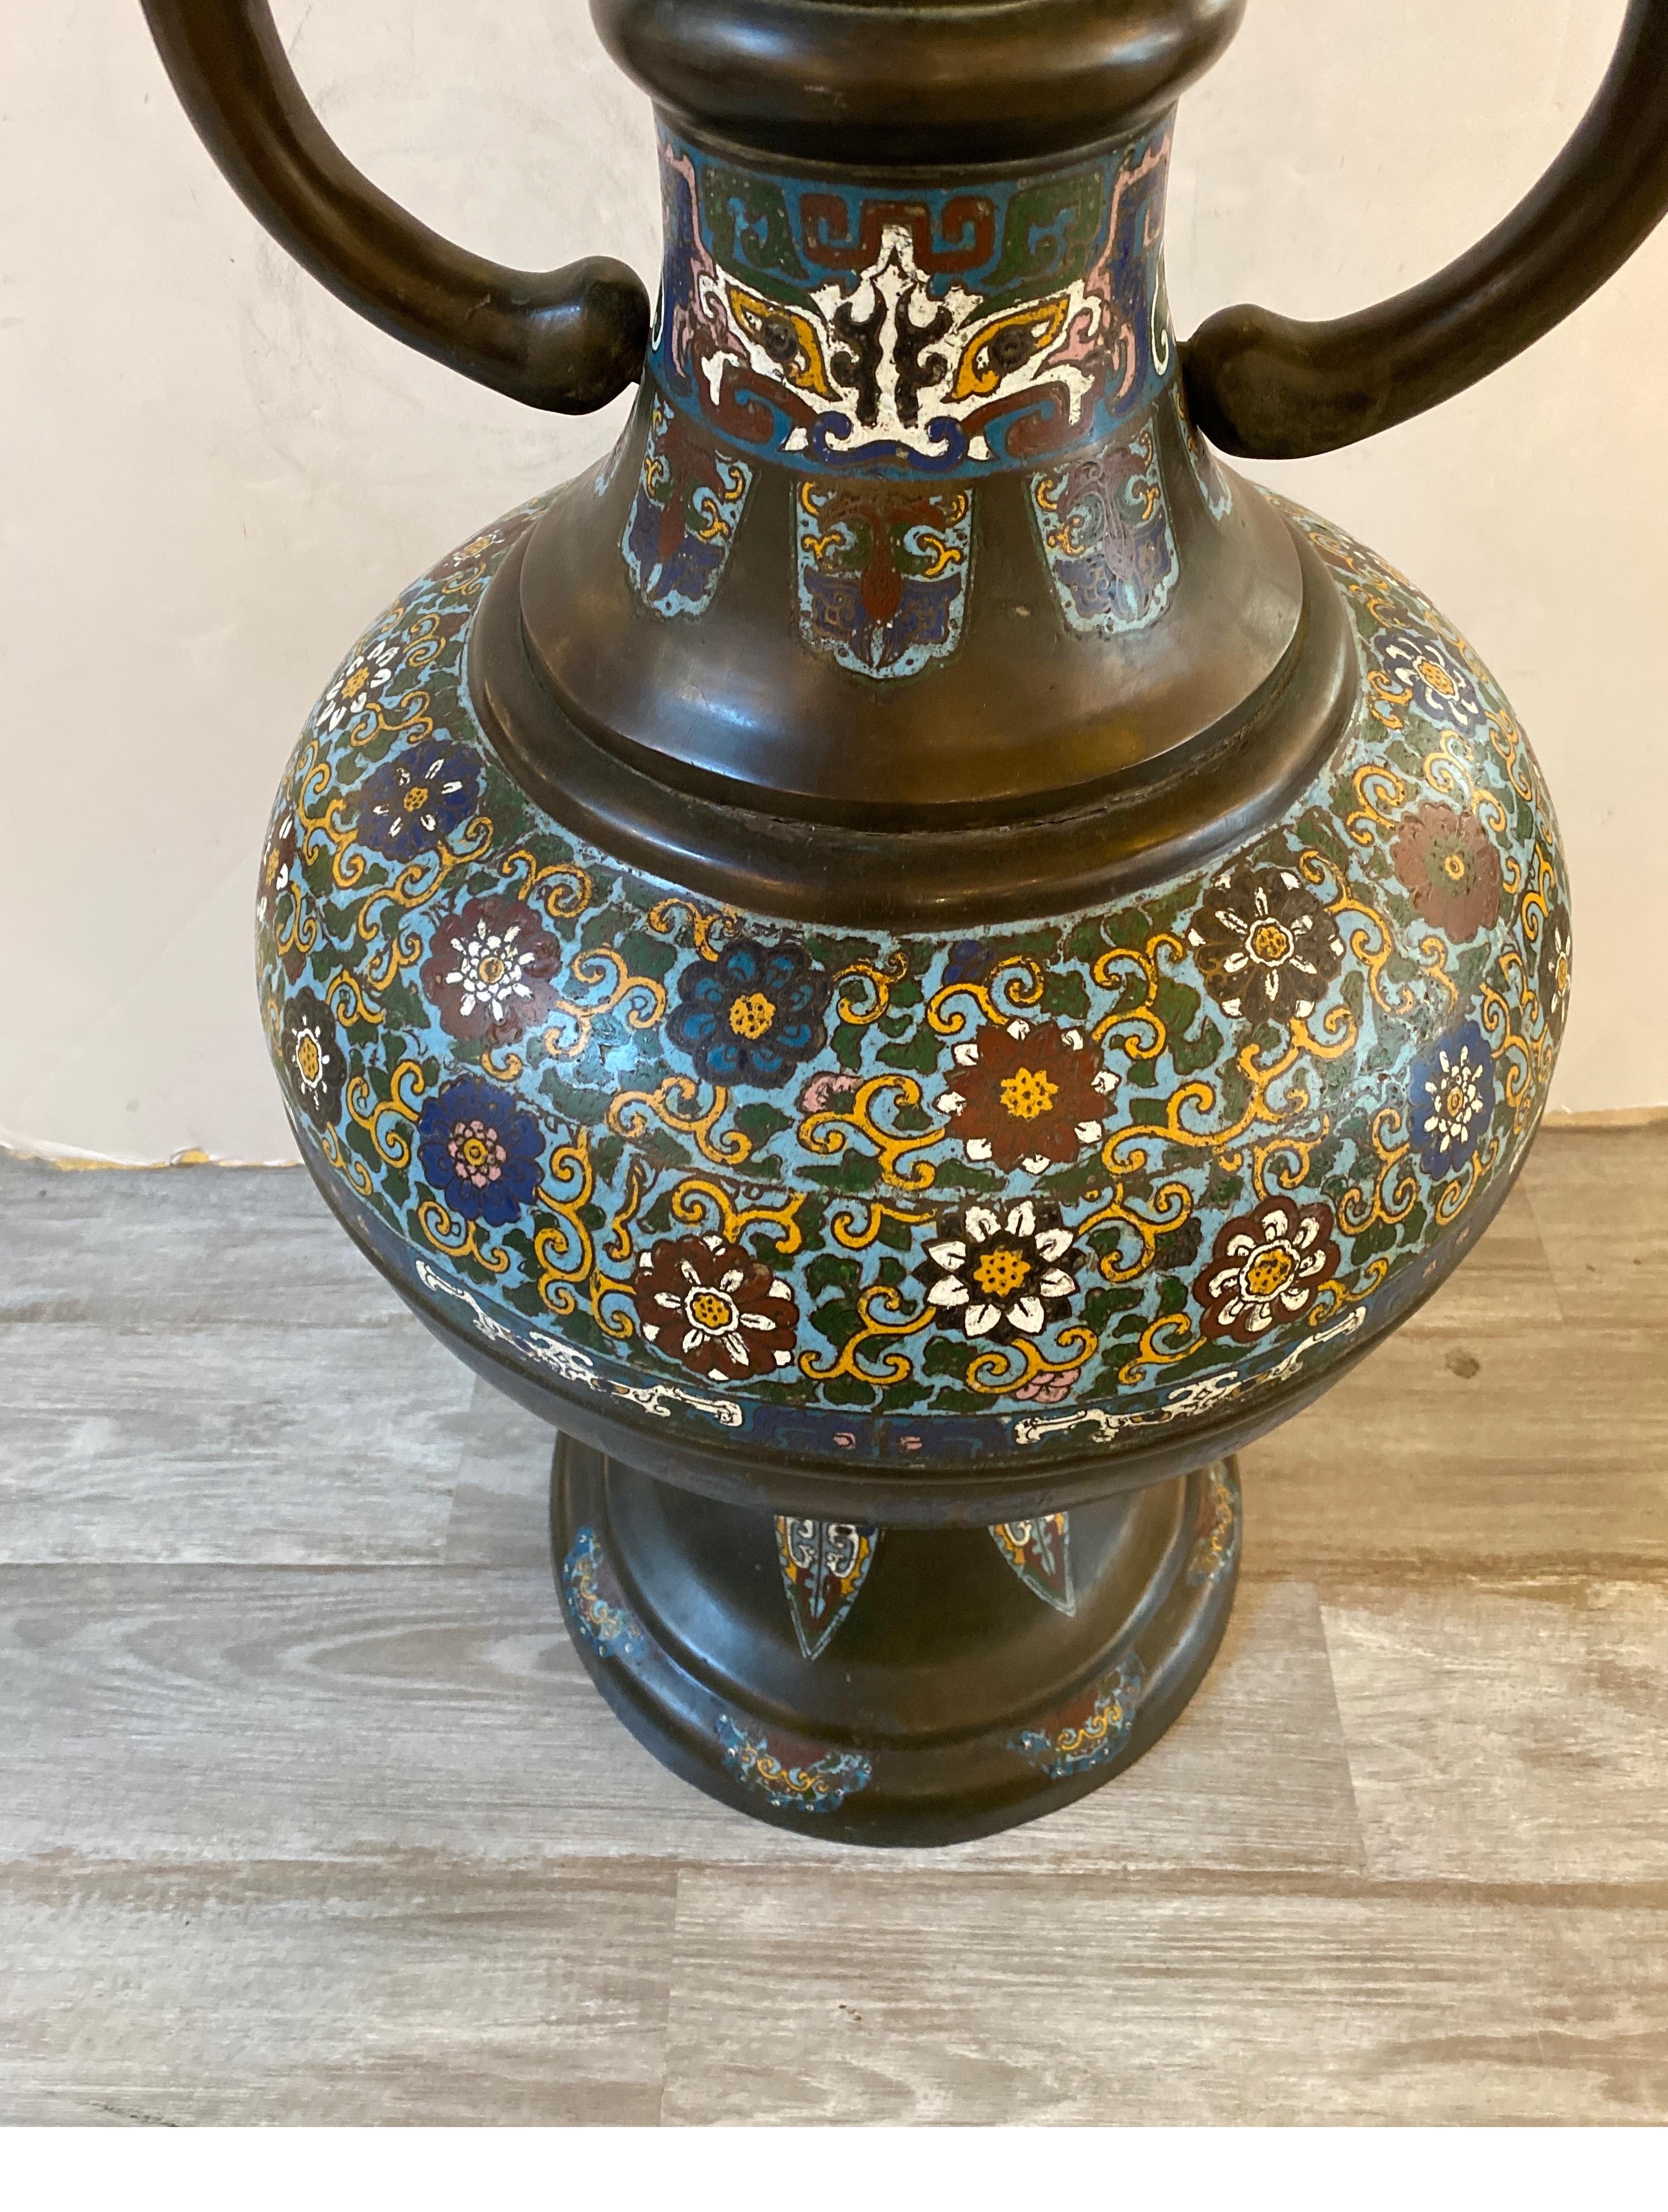 A large cast bronze and champlevé enamel palace vase. The patinated bronze with inlaid enamel decoration with mythical cast bronze dragon form handles.